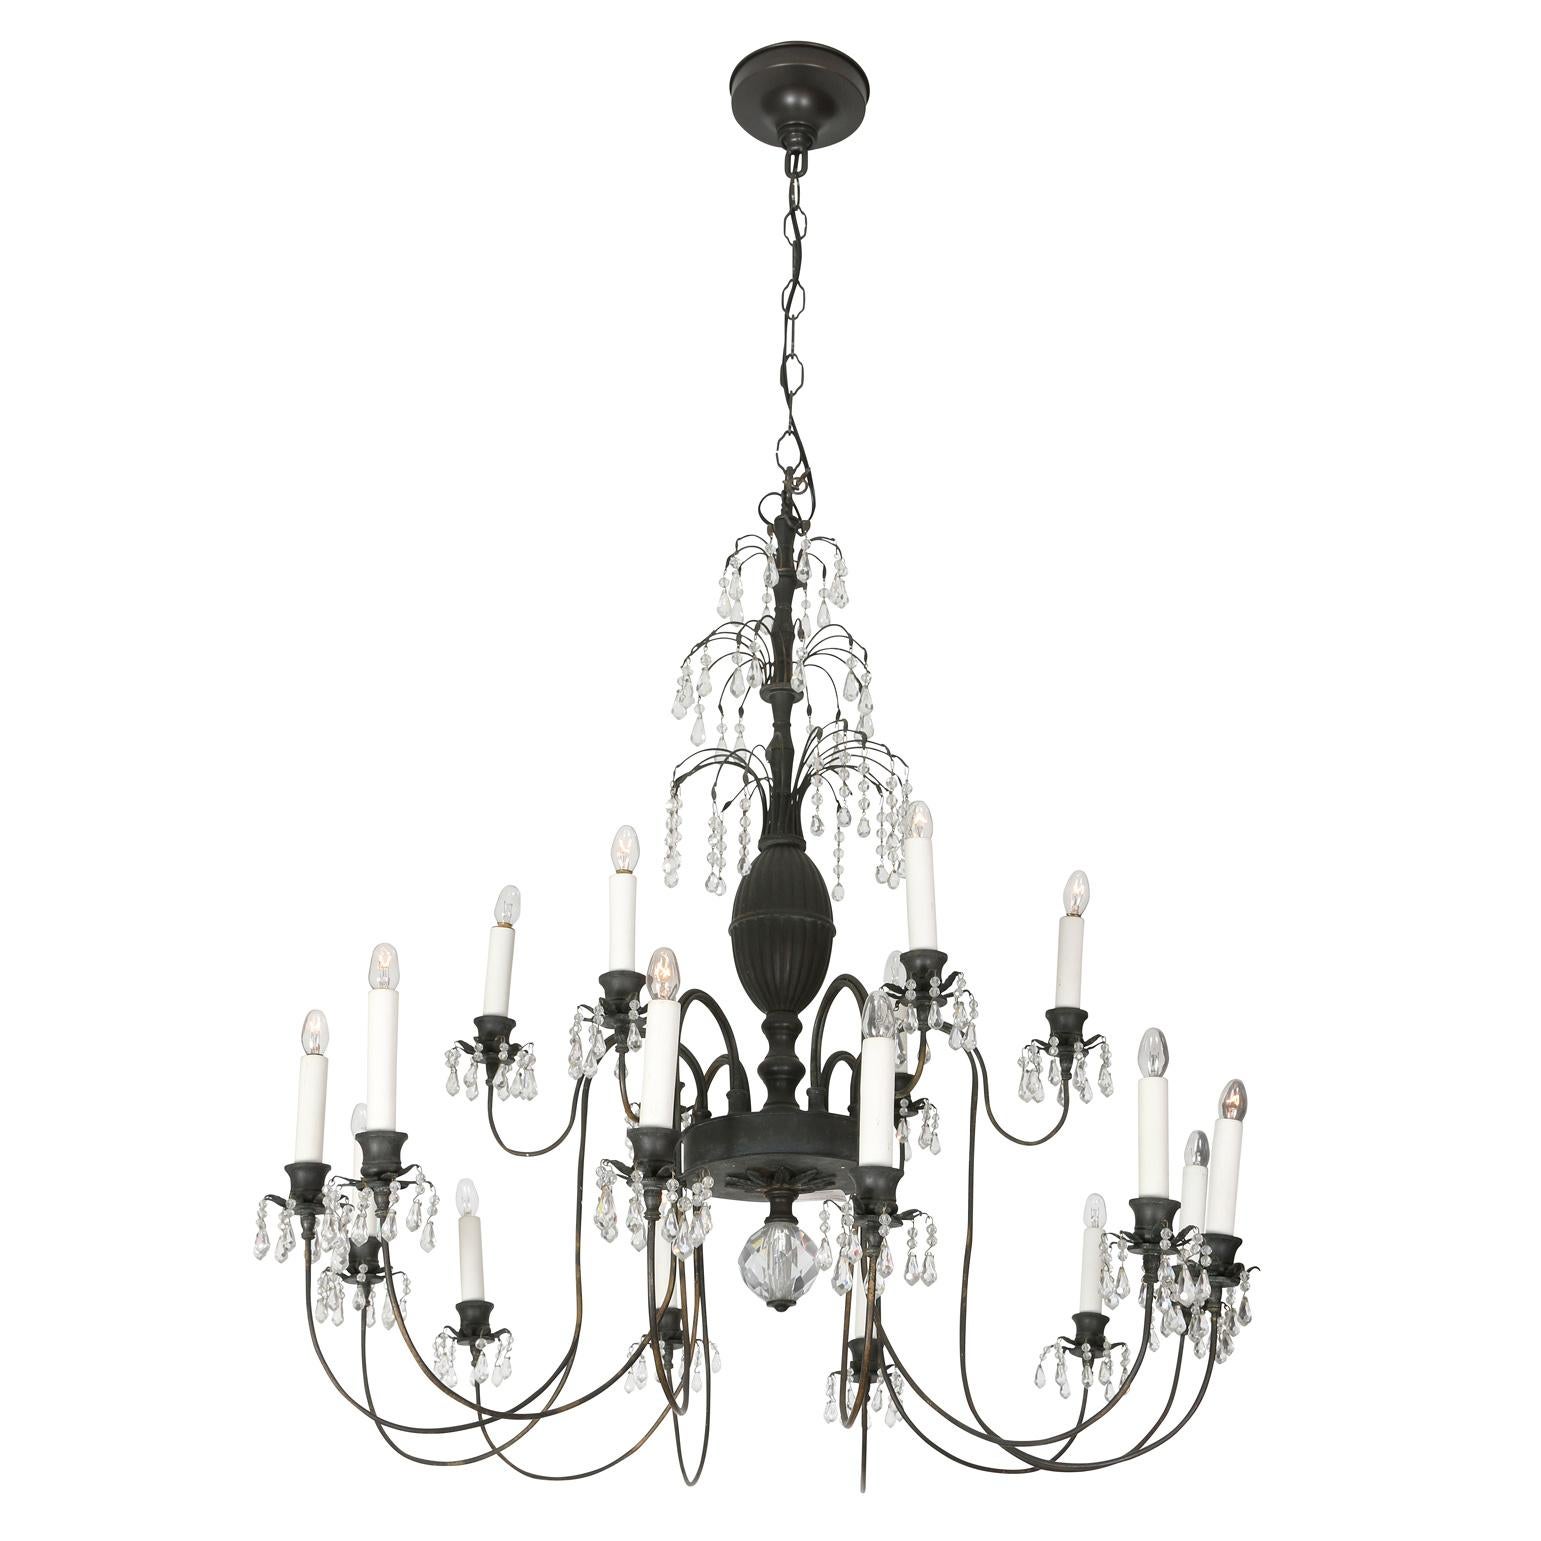 A whimsical chandelier in the Hollywood Regency style. This unique piece in bronze consists of 18 arms stemming from a center column filled with small beads and teardrop crystals. A large round crystal hands from the center. Light and airy, the